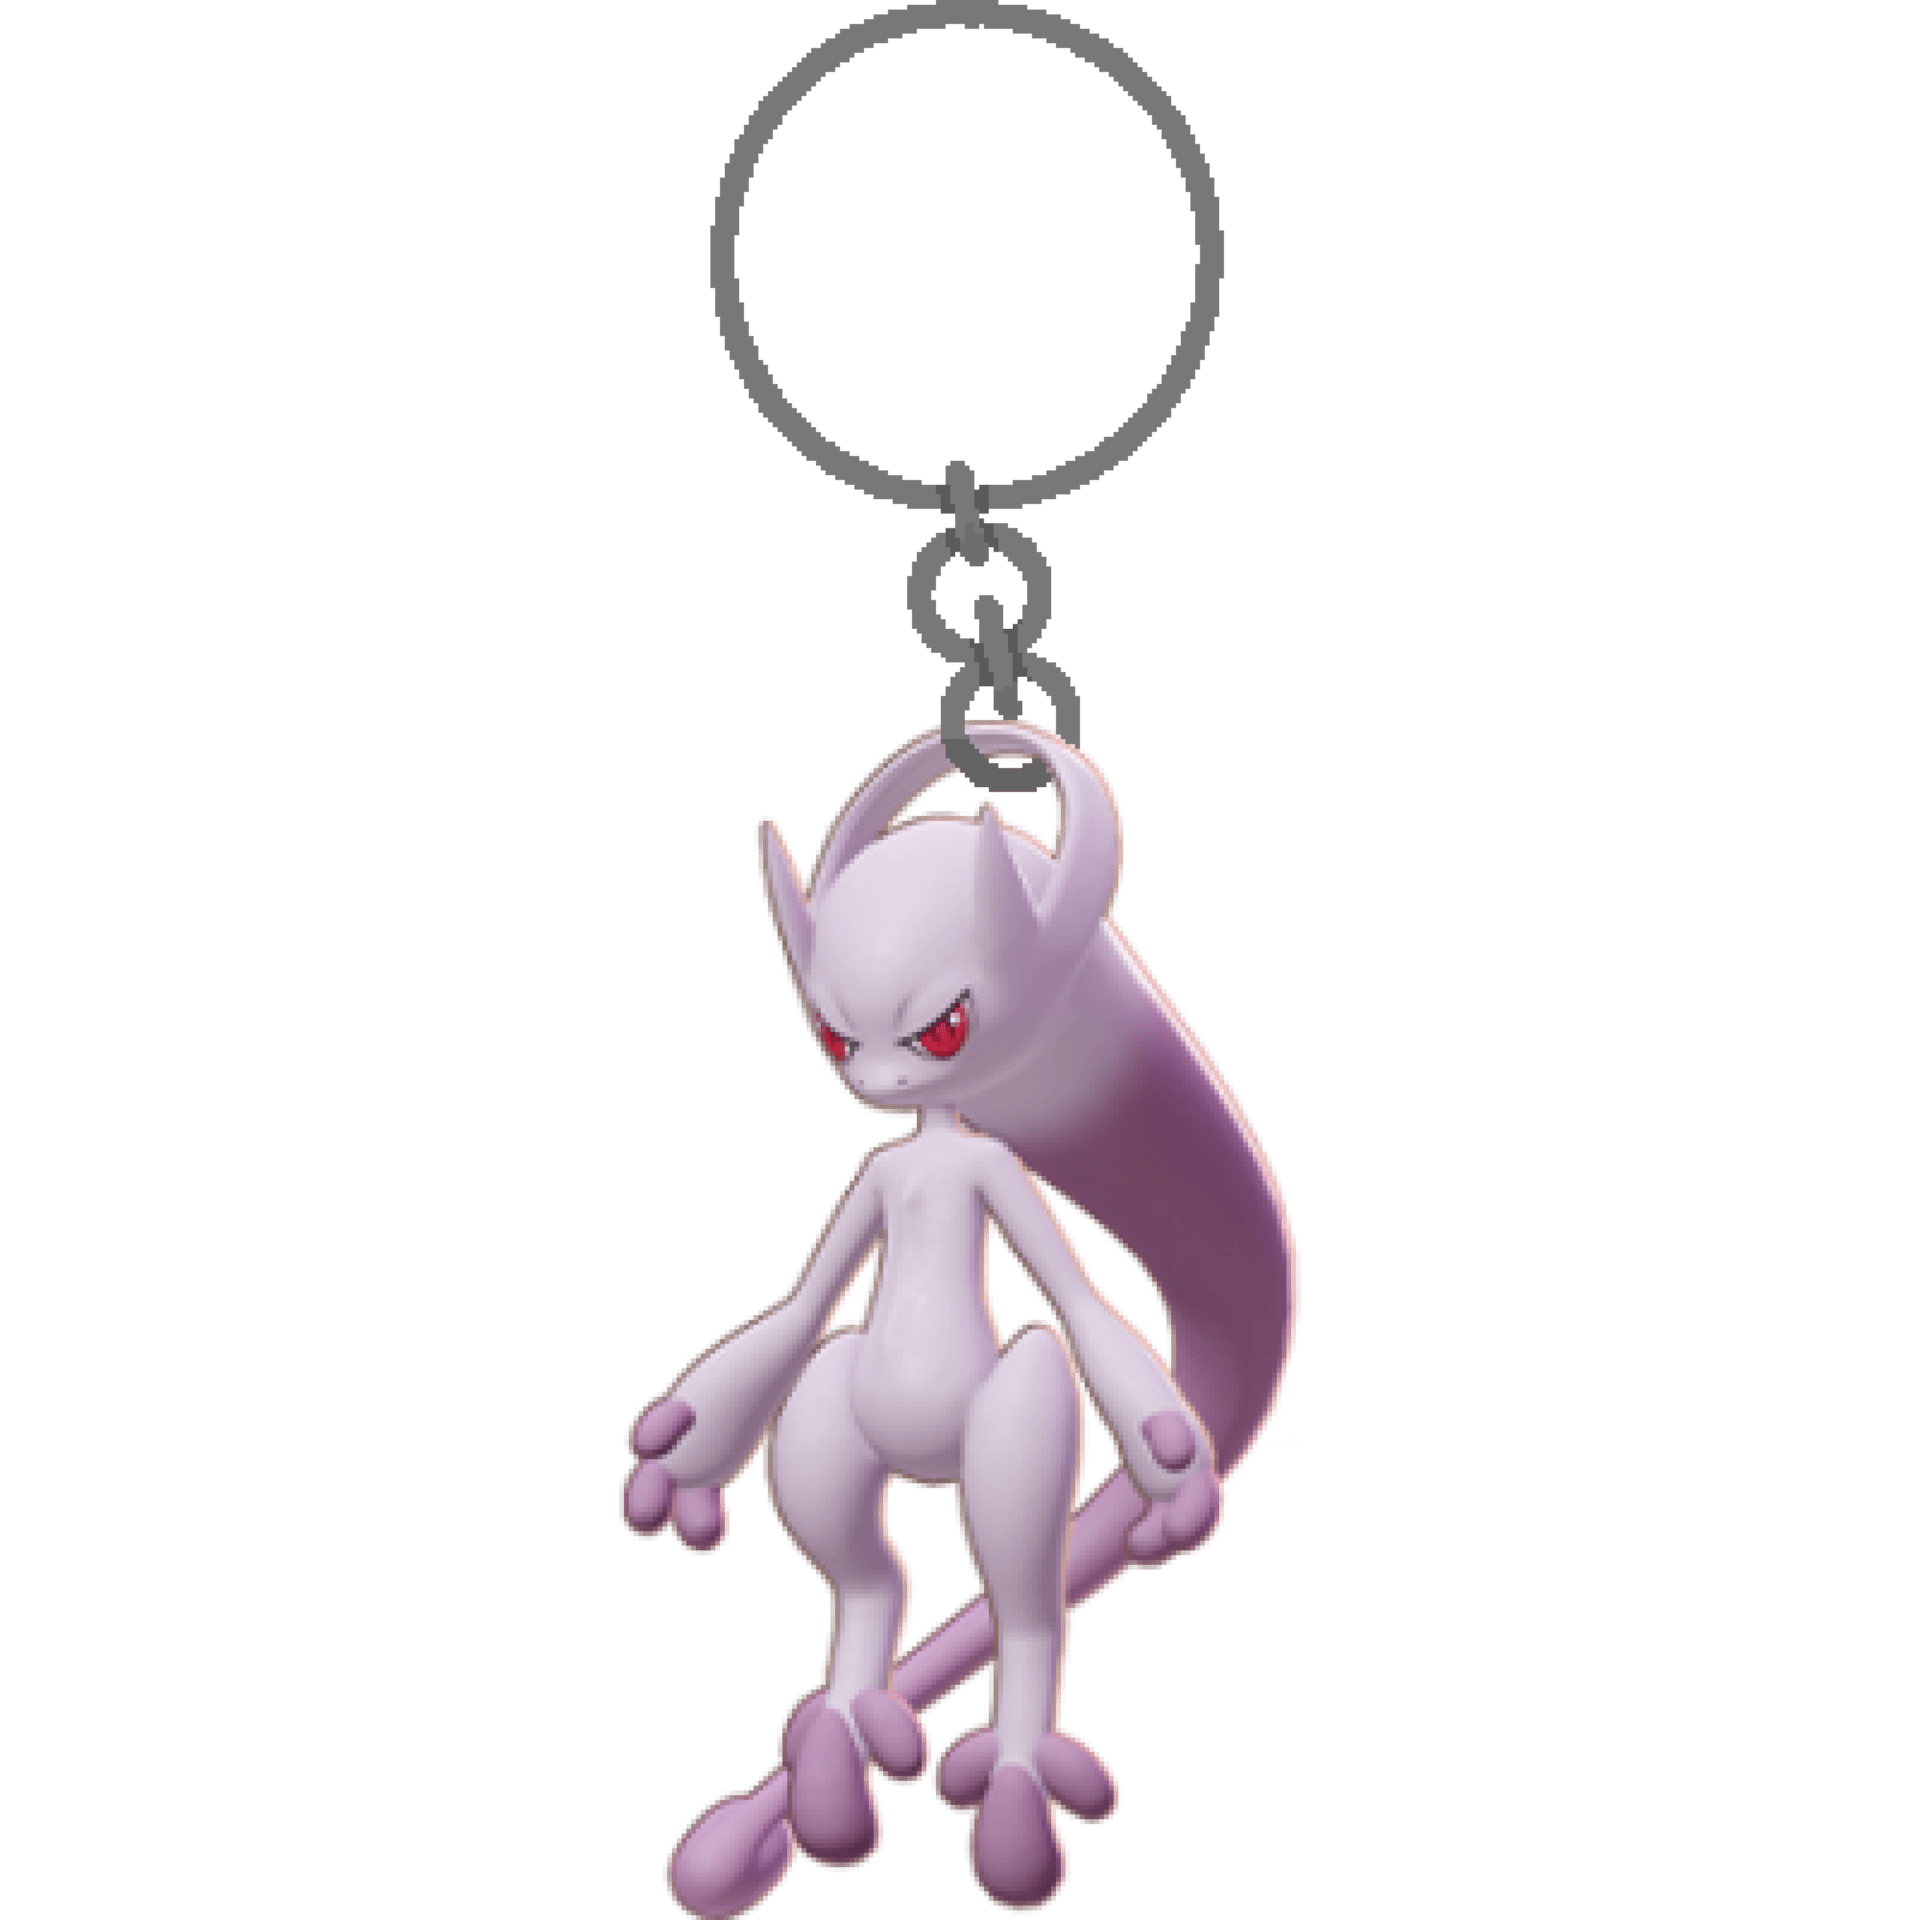 Best MEWTWO Y Builds - Pokemon Unite [Strategy Guide]